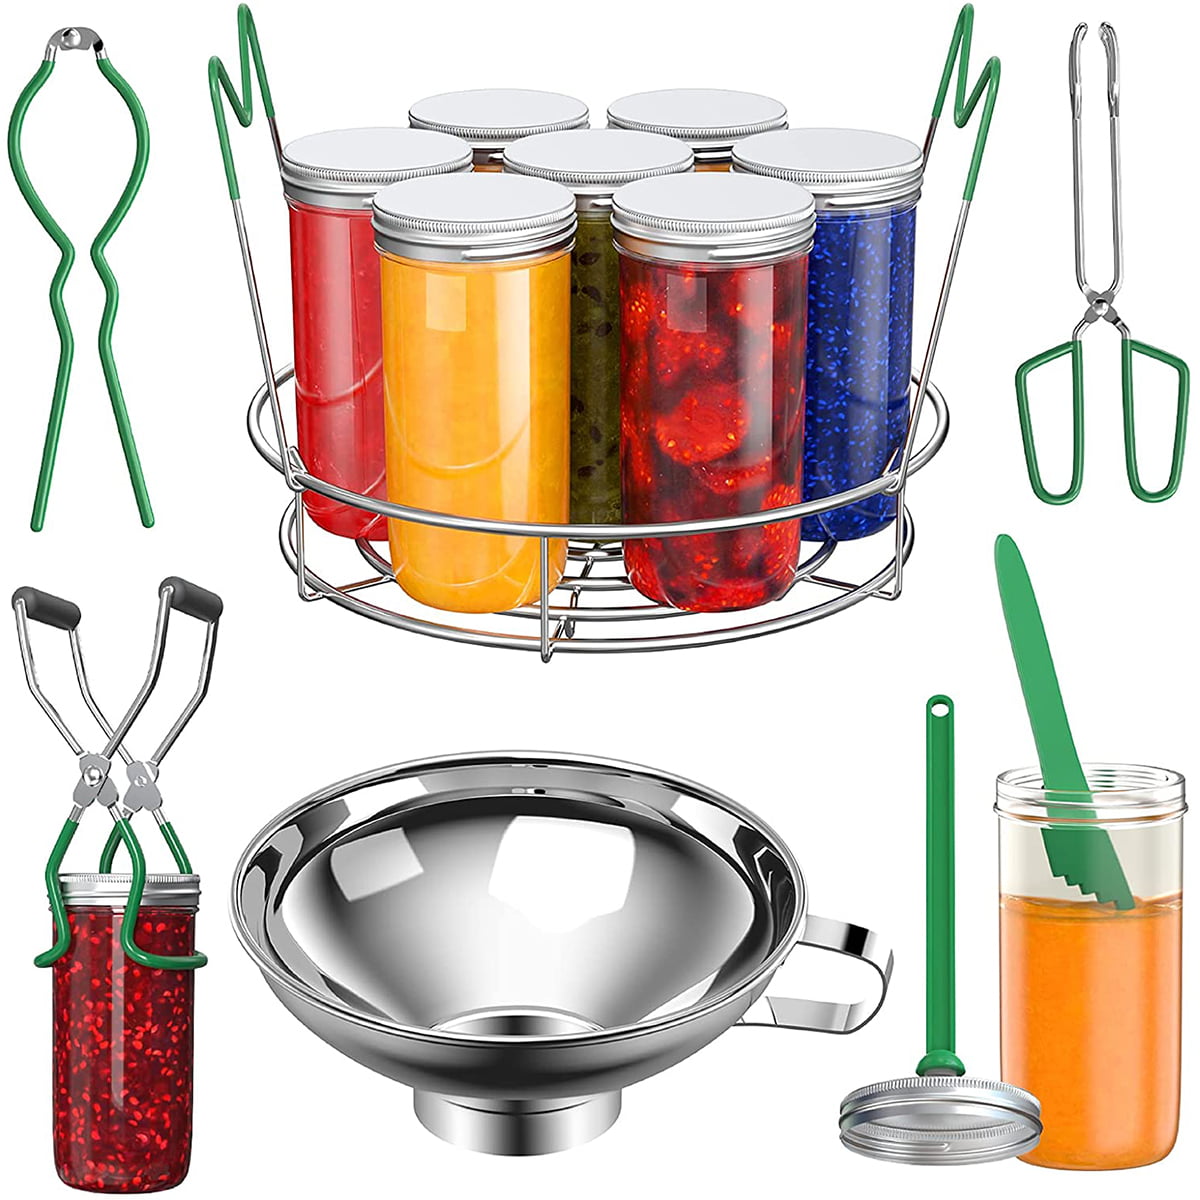 Canning Supplies Starter Kit, All-in-one Canning Kit for Beginners - Food  Grade Stainless Steel Canning Tools, Home Canning Set Canning Accessories